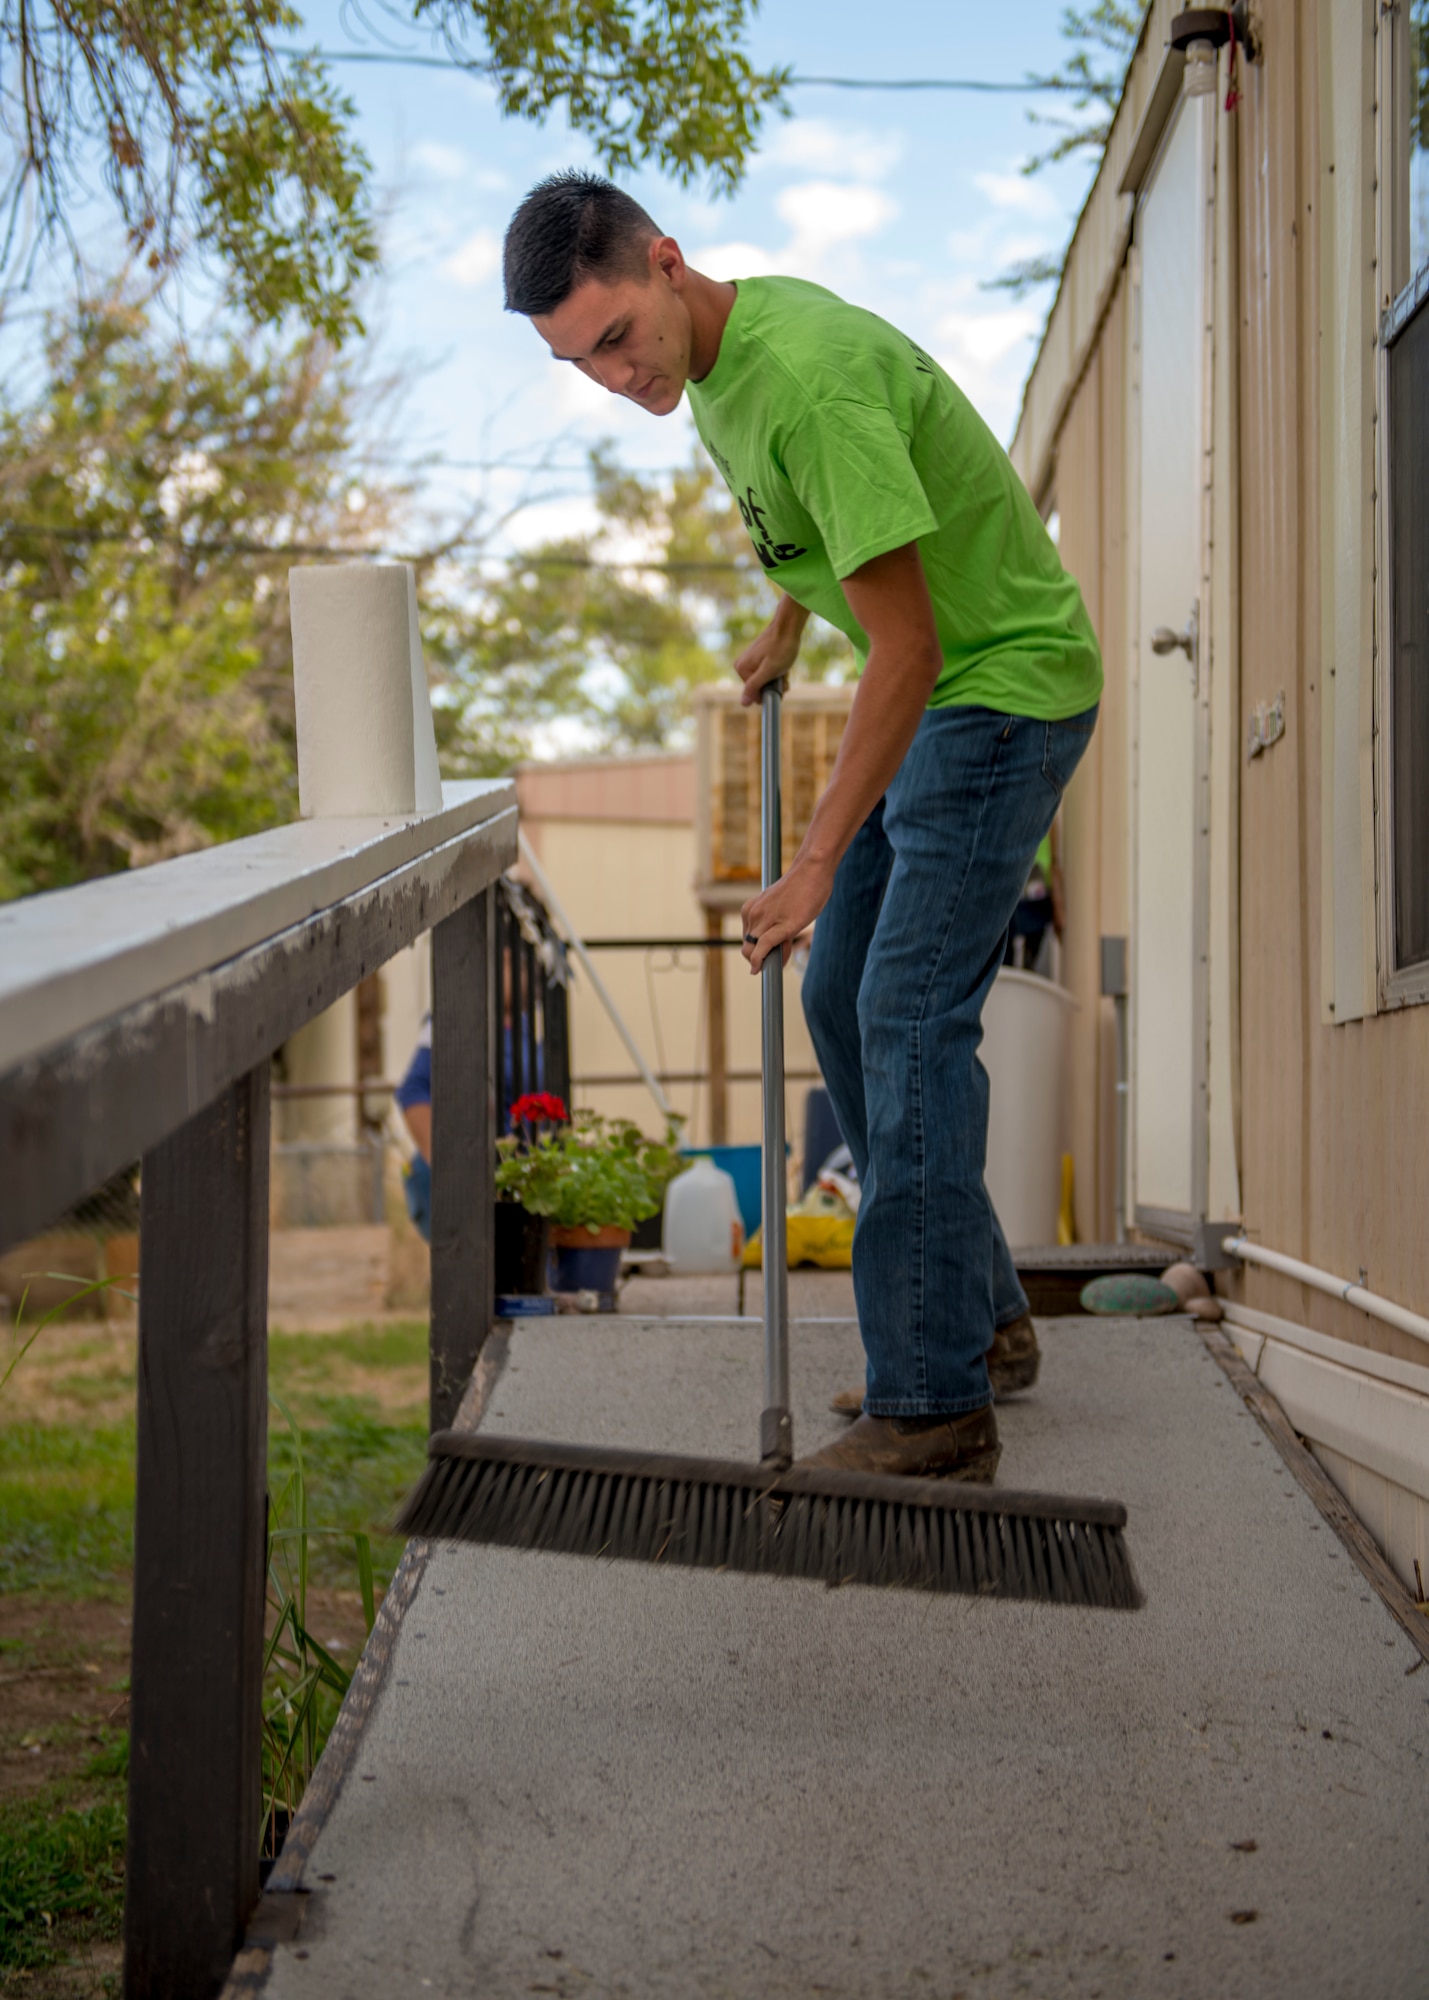 Airman 1st Class Jacob Boren, 9th Aircraft Maintenance Squadron MQ-9 Reaper weapons load crew member, sweeps a porch, Sept. 6, 2019, at a residence in Alamogordo, N.M. Day of Caring volunteers performed various tasks, such as home repairs and yard work, at pre-determined job sites for individuals who are either unable to accomplish the tasks themselves or do not the resources to do so. (U.S. Air Force photo by Airman 1st Class Kindra Stewart)